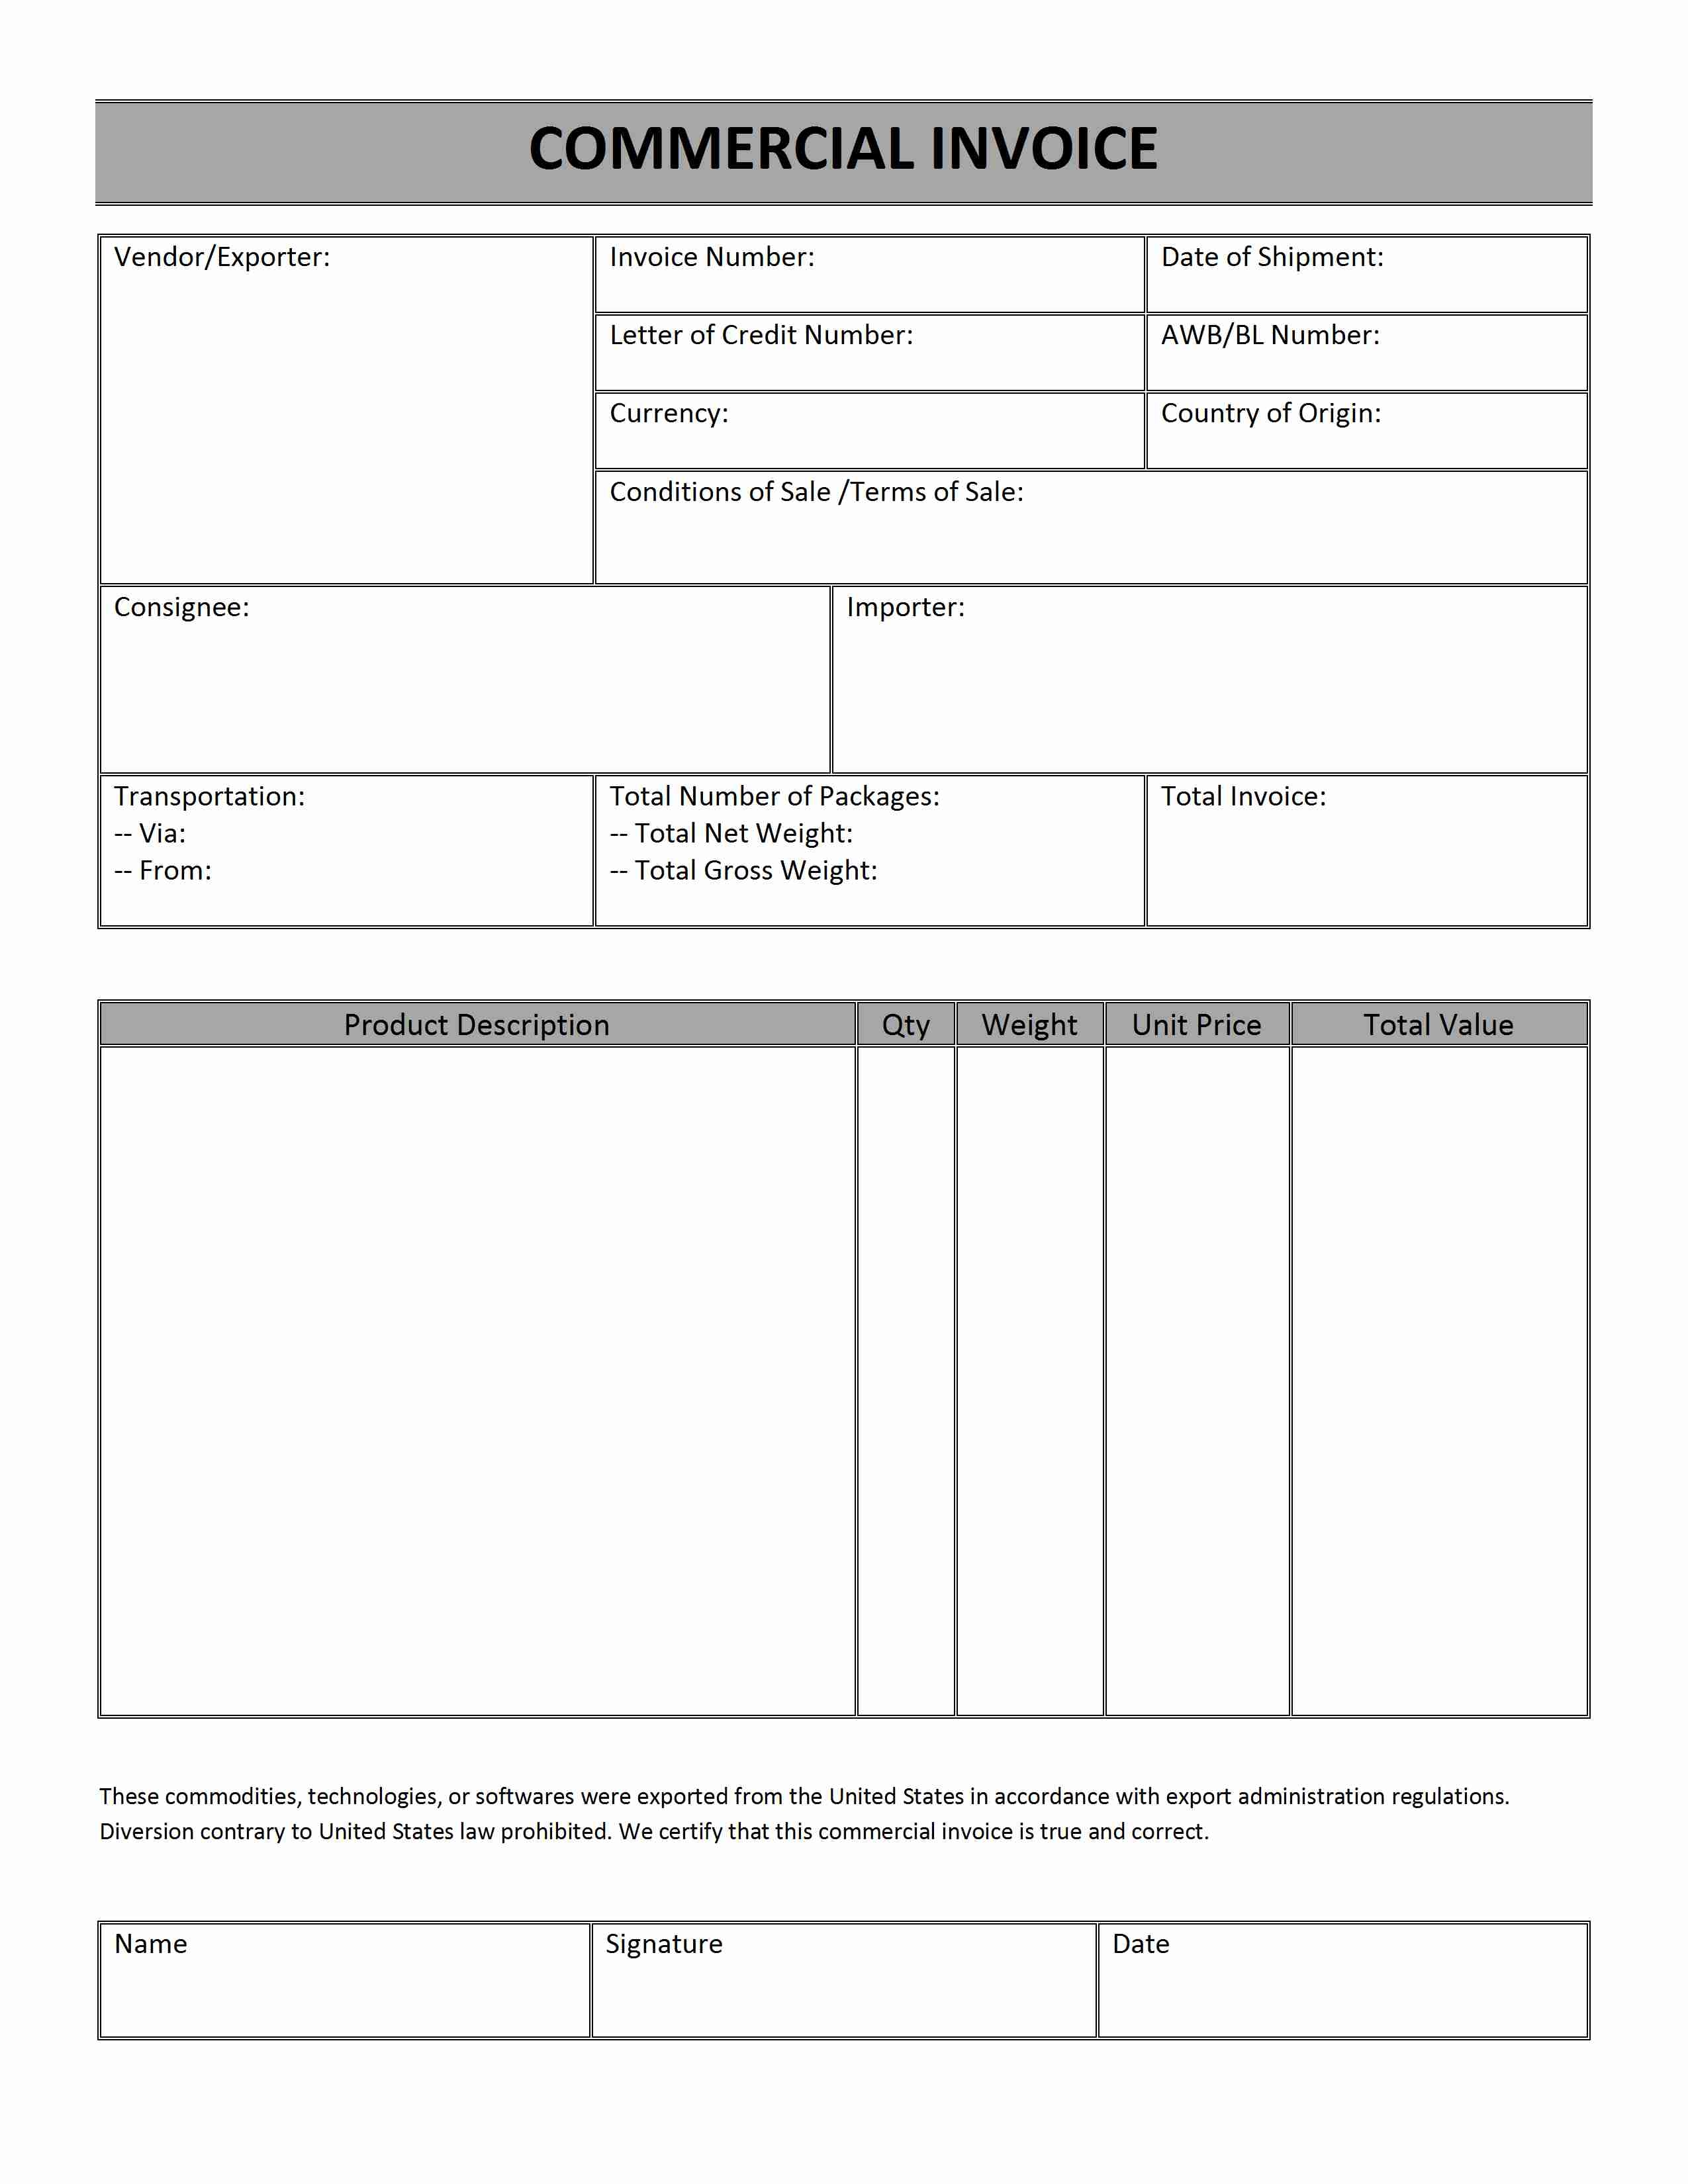 ups commercial invoice template word